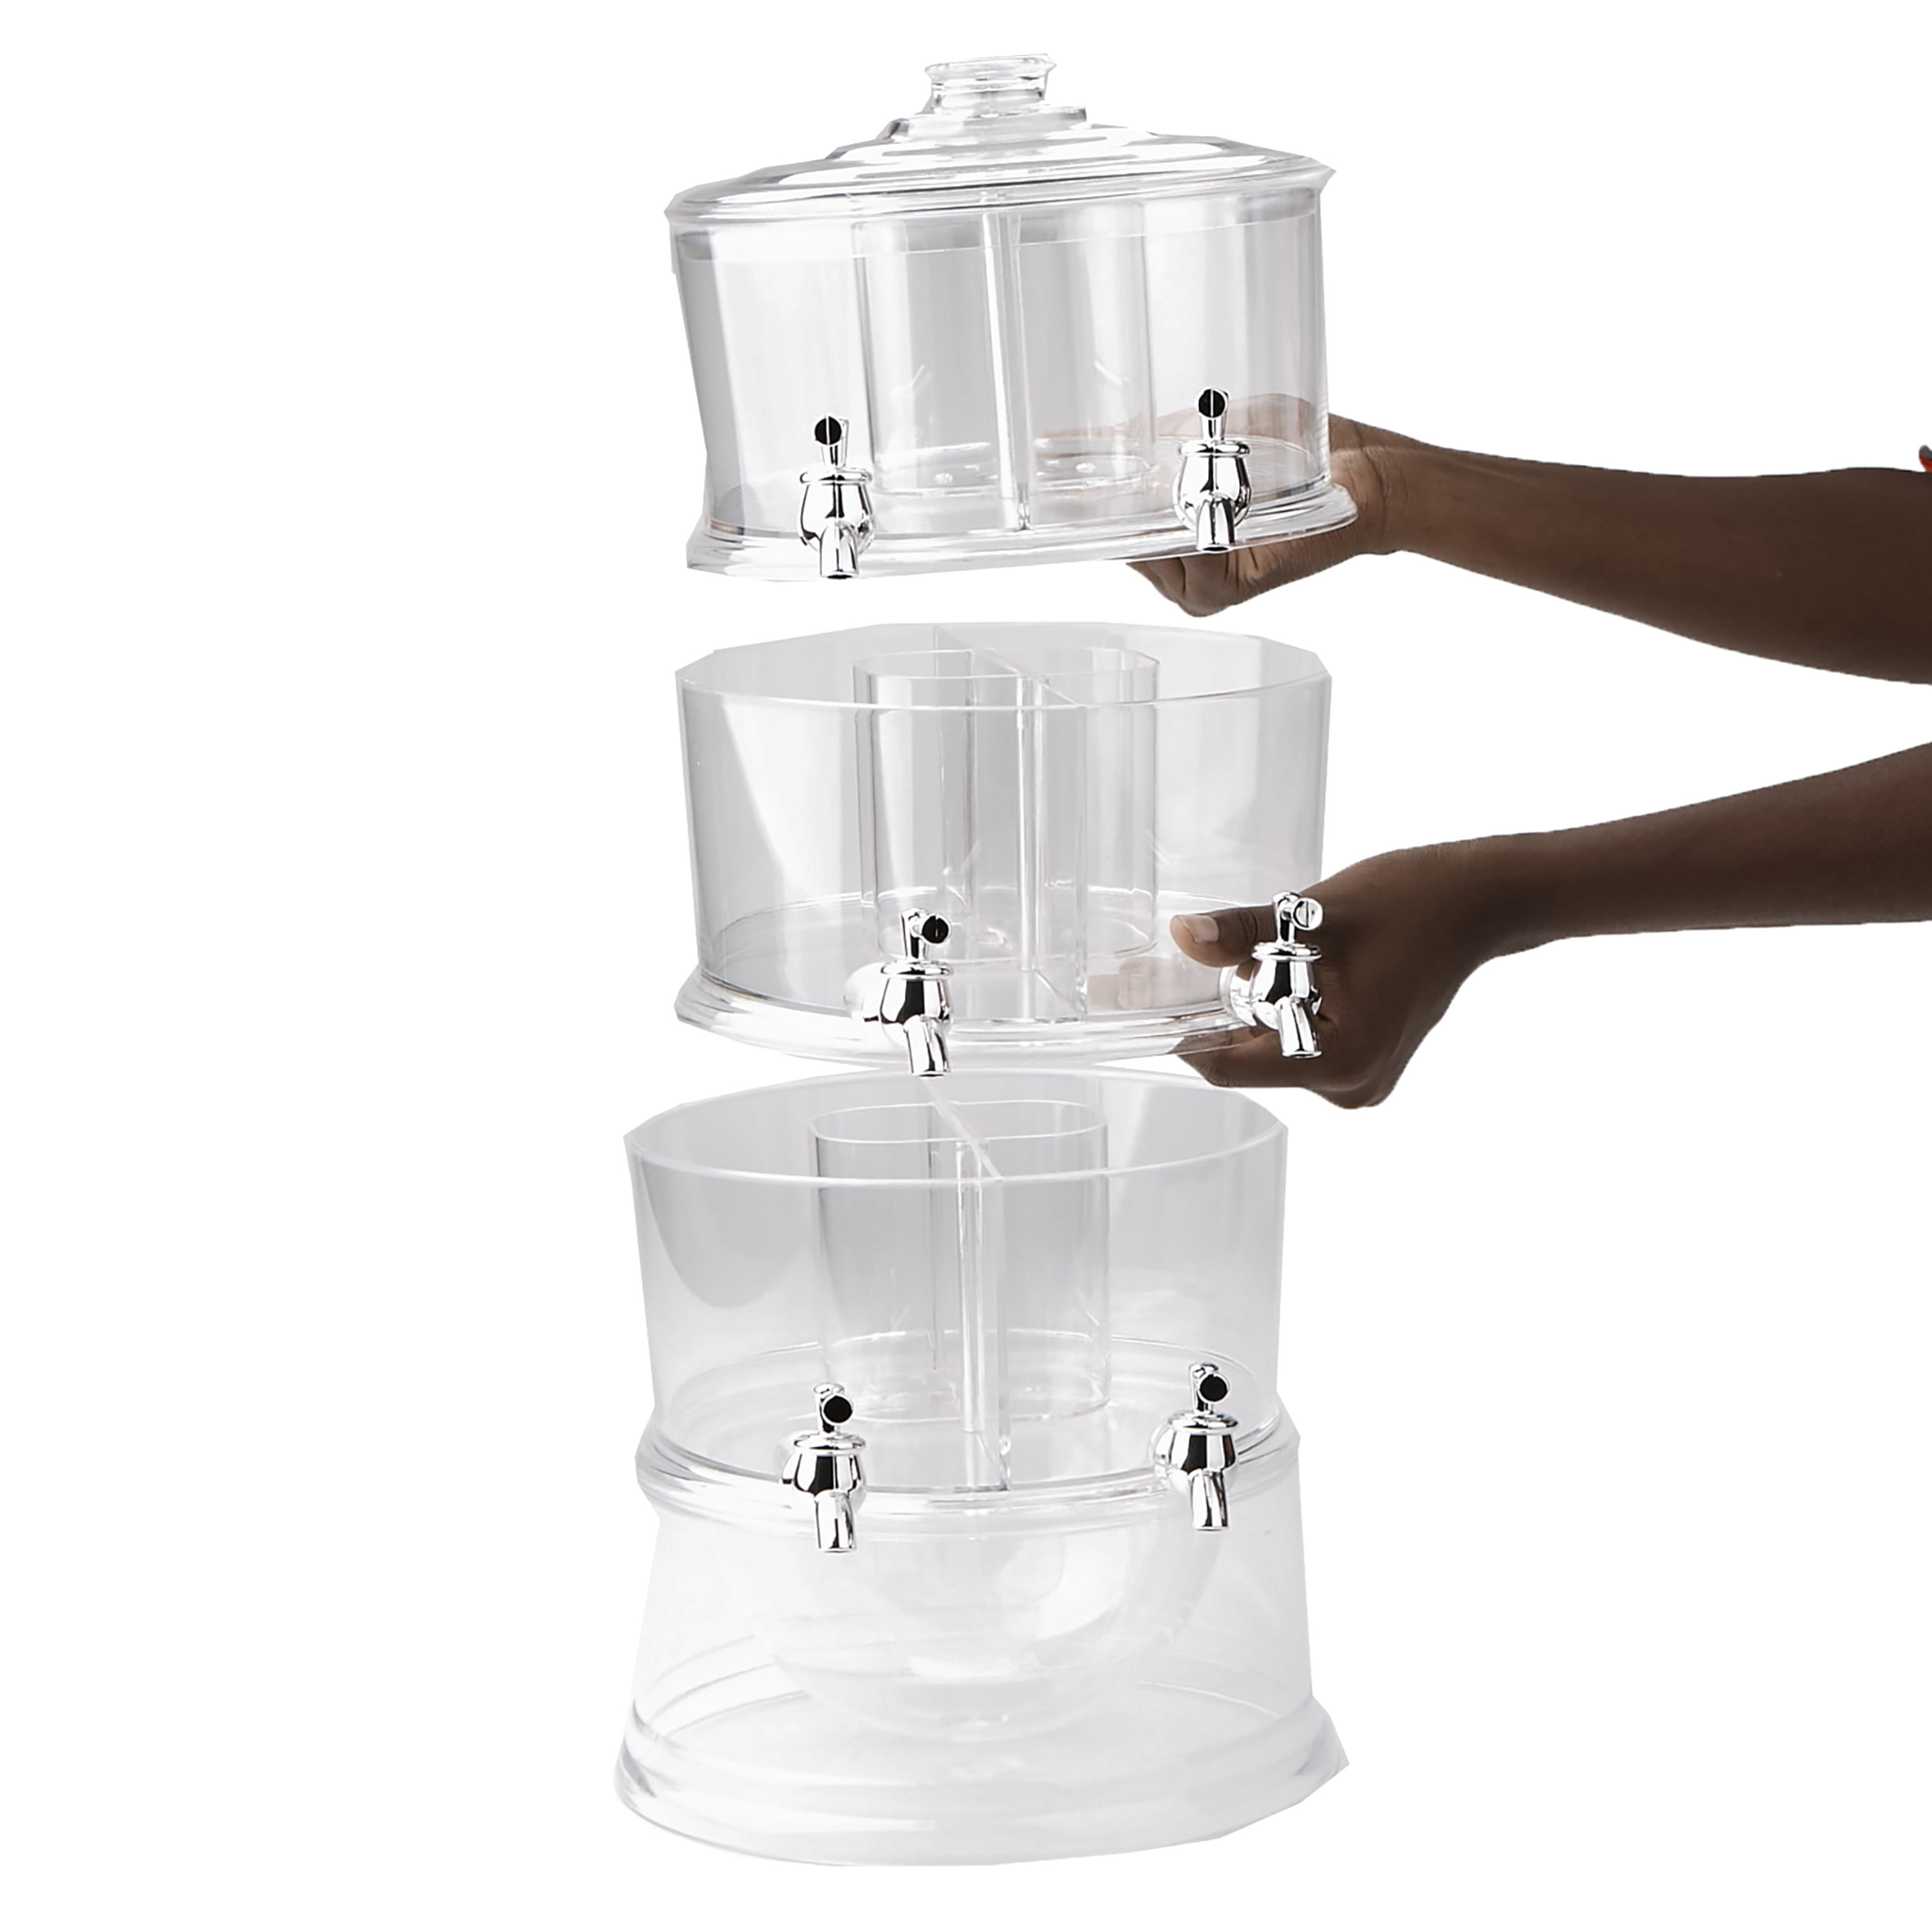 The Outdoor Drink Dispenser That Can Be Passed Down Through Generations -  Eater